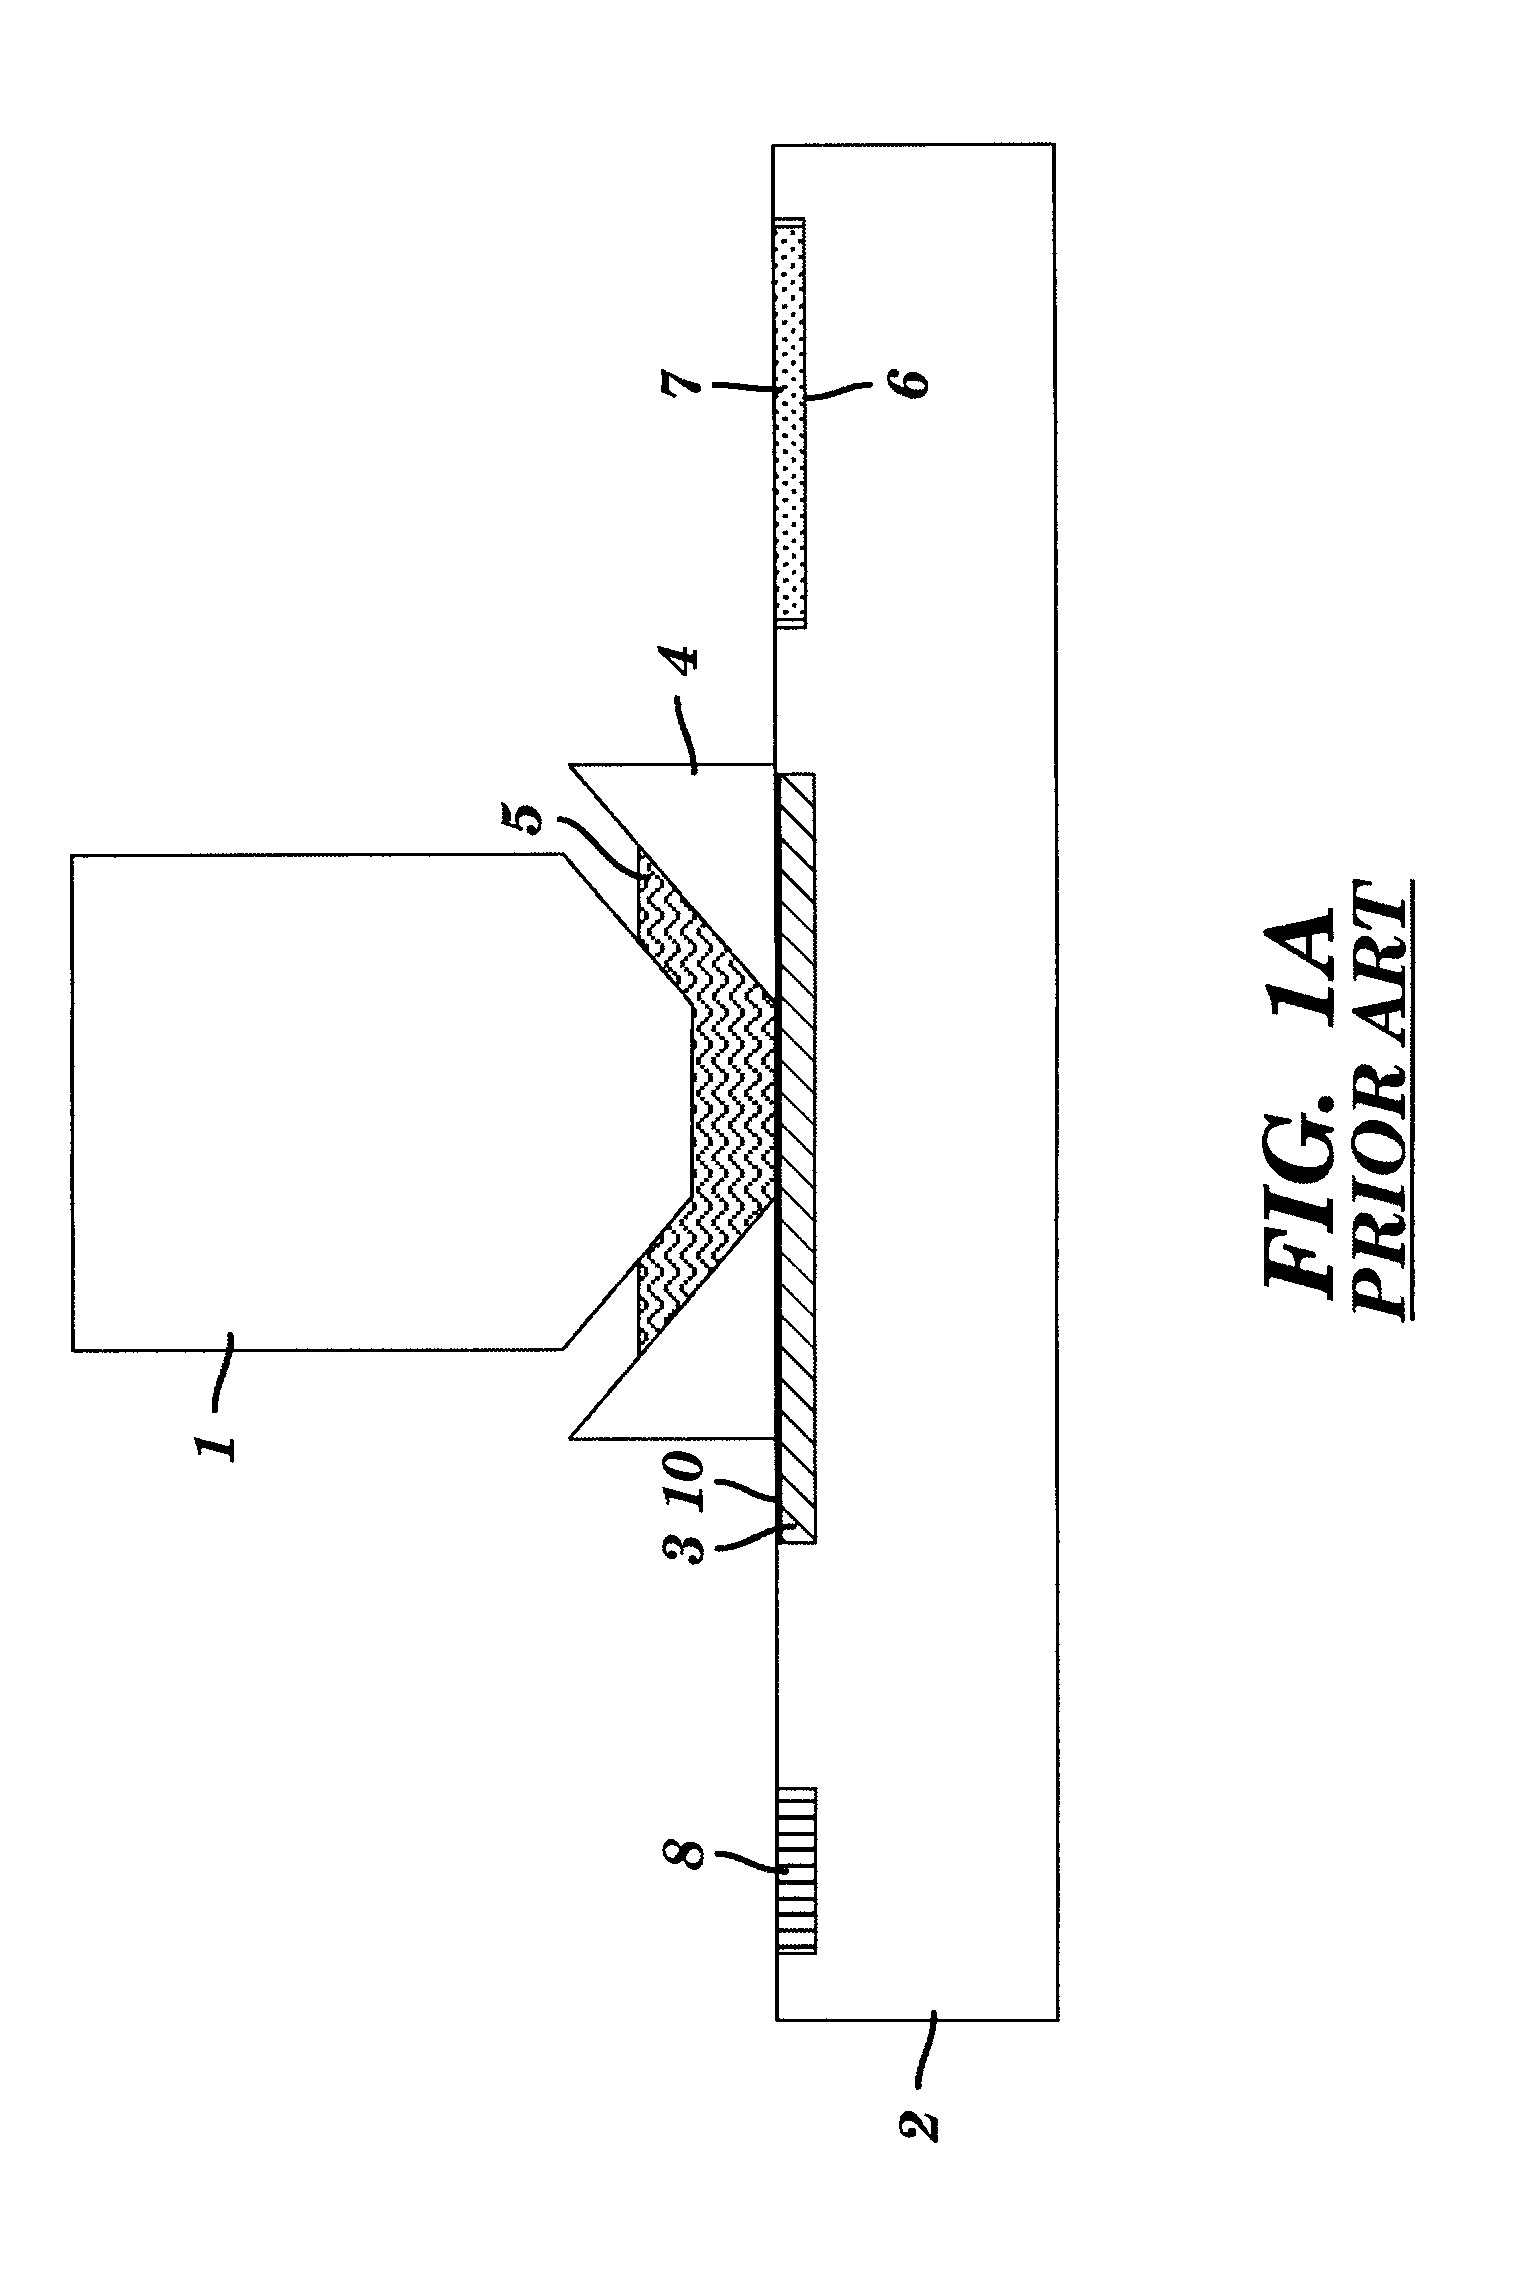 Method to reduce mechanical wear of immersion lithography apparatus